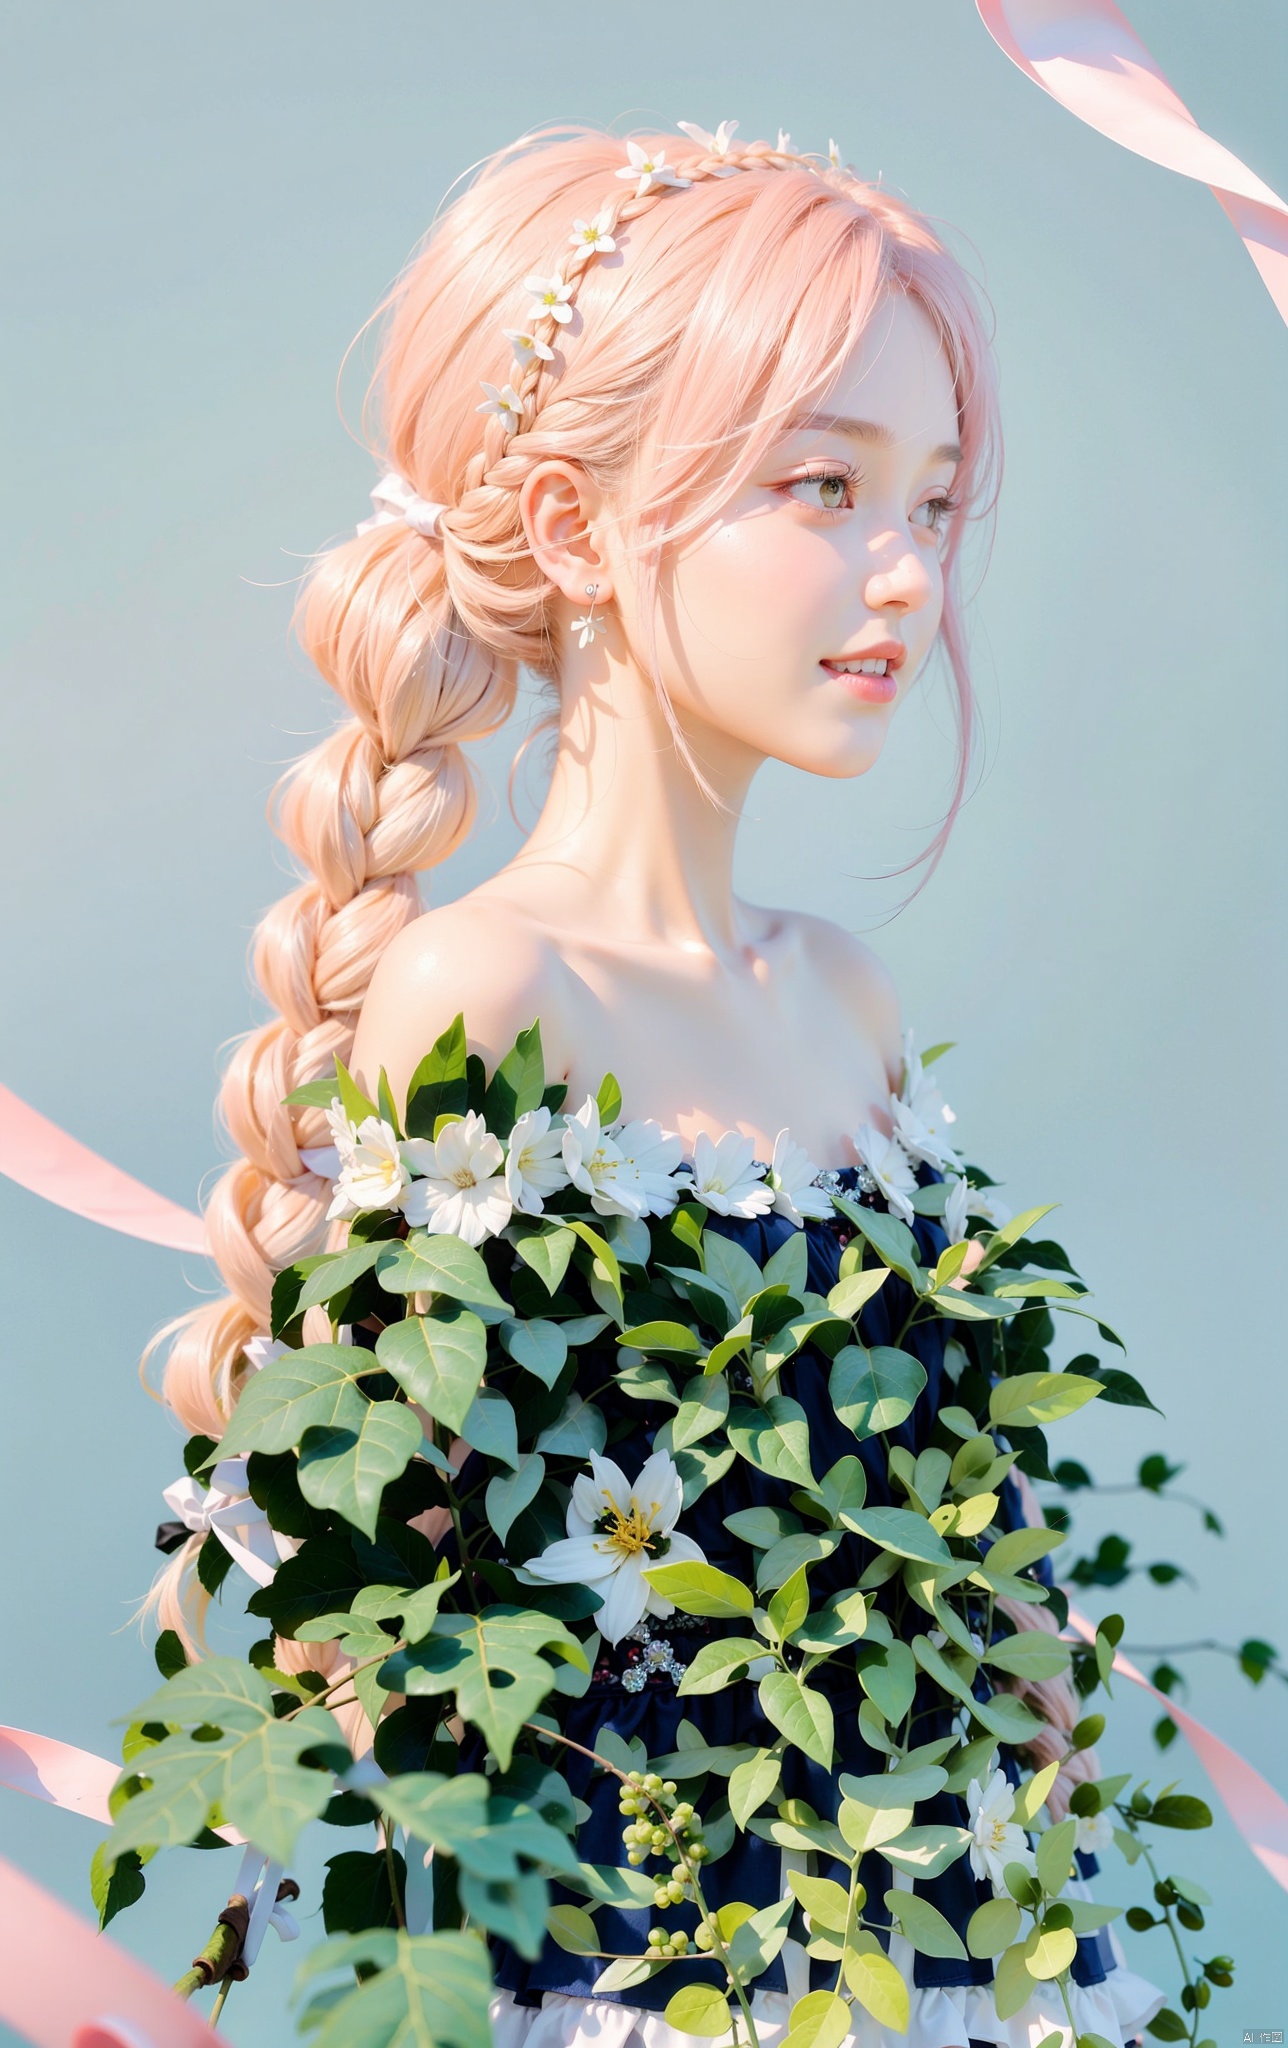 1 girl, solo, long hair, looking at audience, blushing, smiling, bangs, hair accessory, bow, jewelry, yellow eyes, upper body, pink hair, braids, flowers, hair bow, headband, earrings, outdoor, Parted lips, alternating outfits, side view, side view, book, single braid, blue bow, plants, white flowers, hair on shoulders